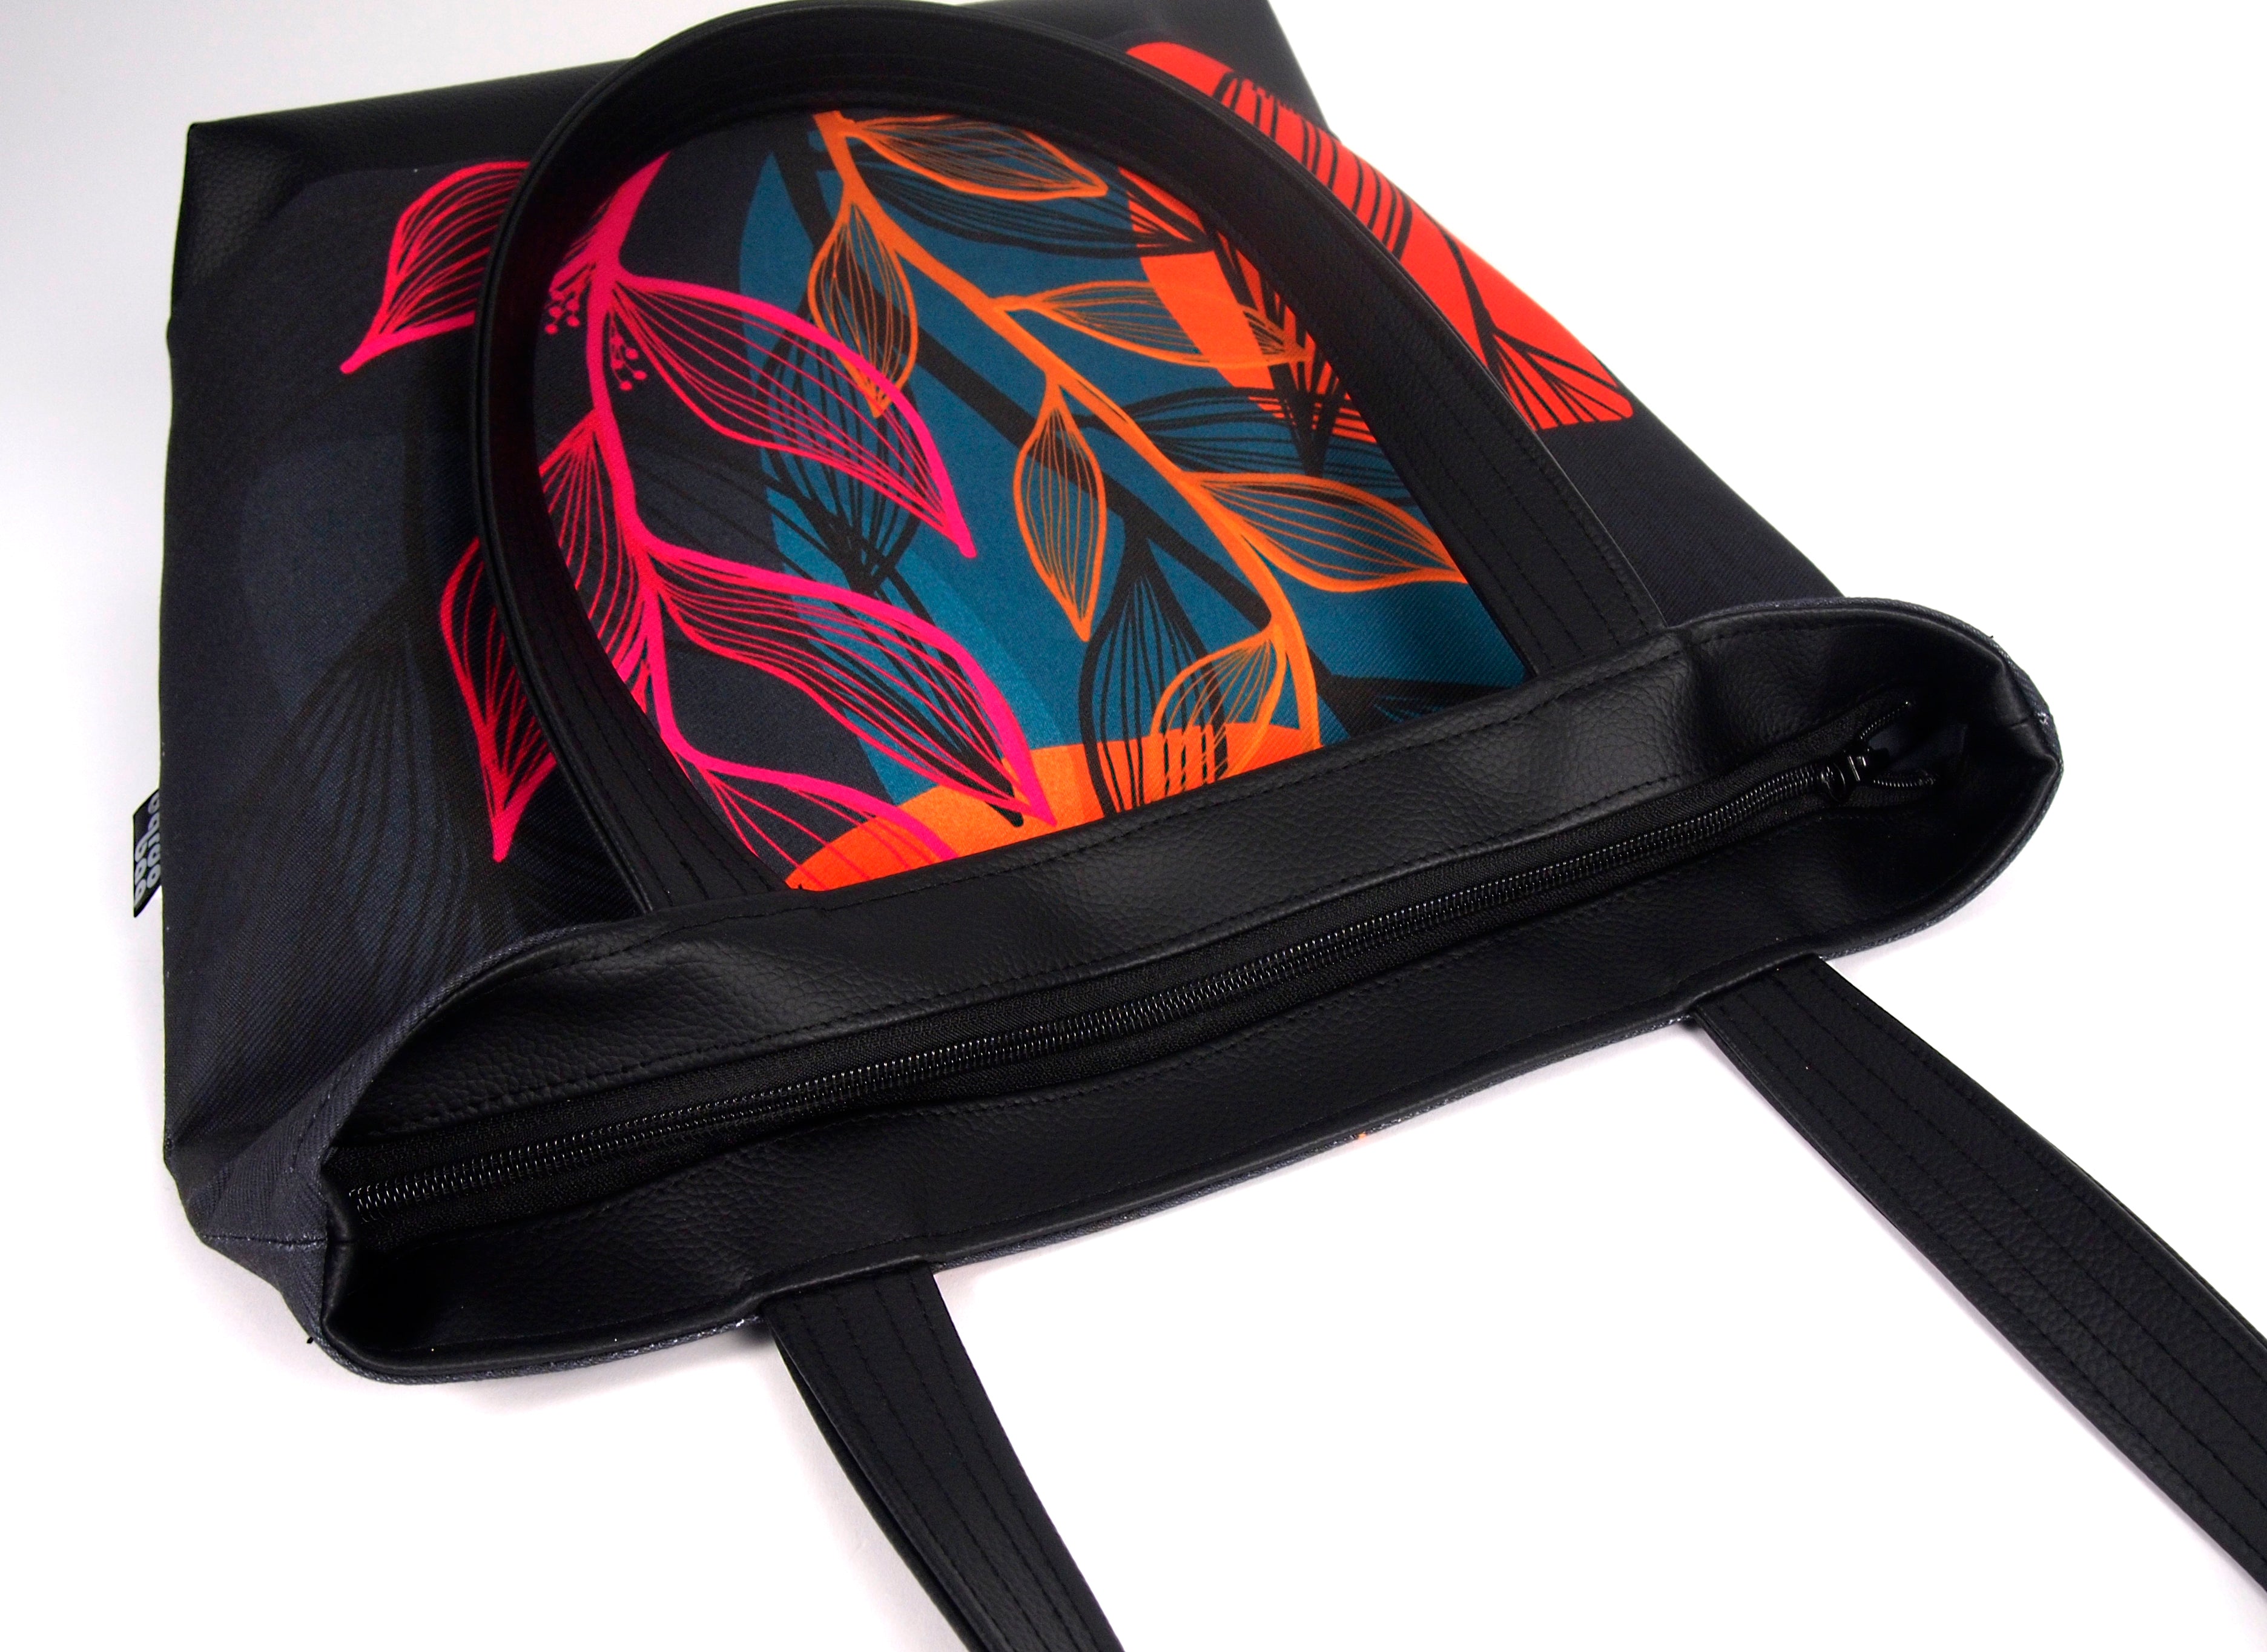 Bardo large tote bag - Summer night - Premium large tote bag from Bardo bag - Just lvabstract, art bag, black, floral, flower, geometric abstraction, gift, green, handemade, large, nature, pink, purple, red, tablet, tote bag, vegan leather, woman, work bag89.00! Shop now at BARDO ART WORKS